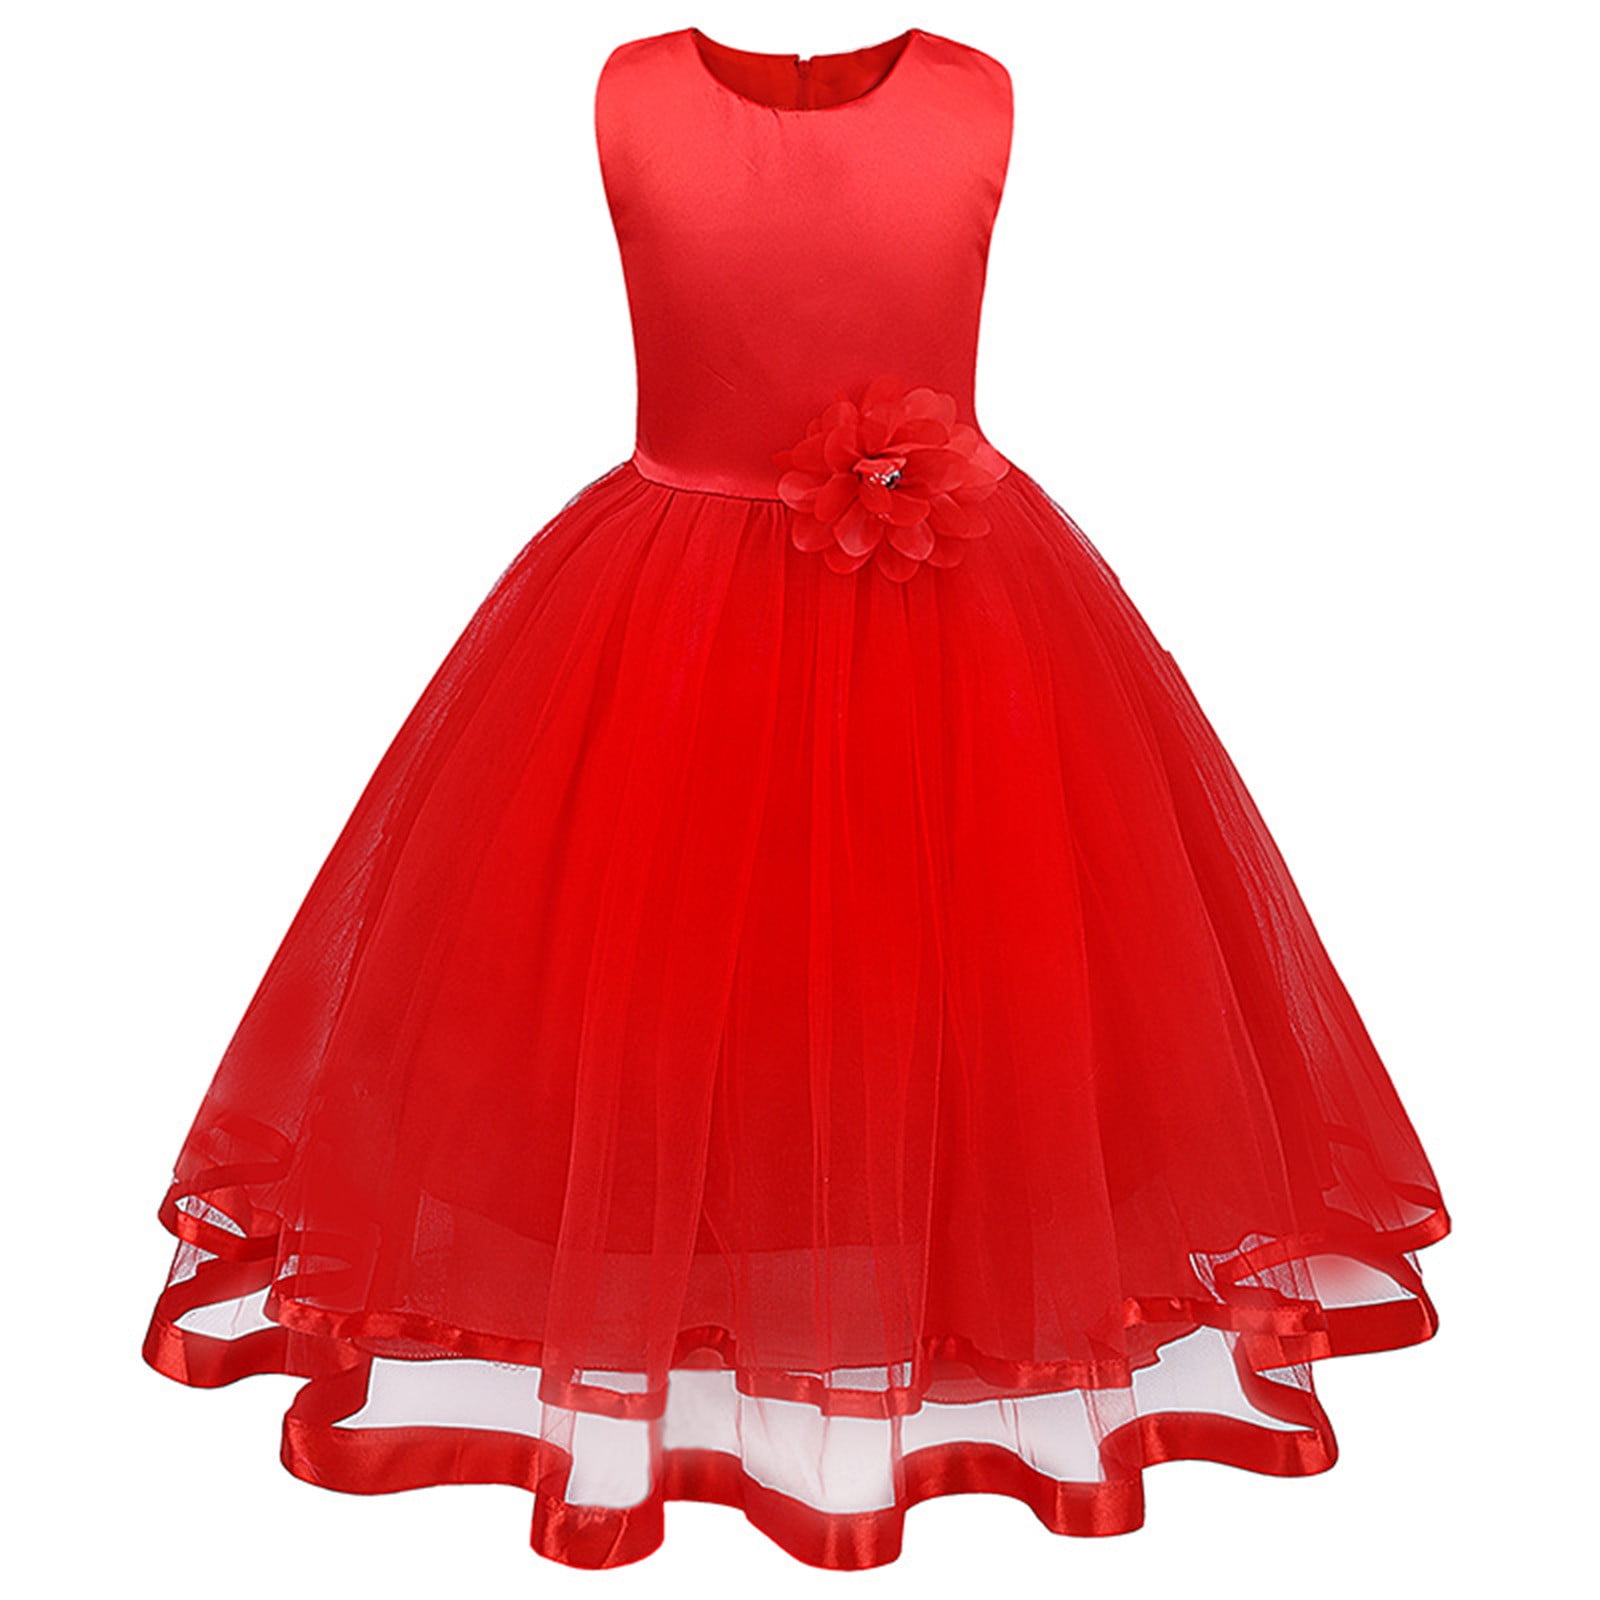 Shop Red Dress for Kids & Girls Online at Best Prices